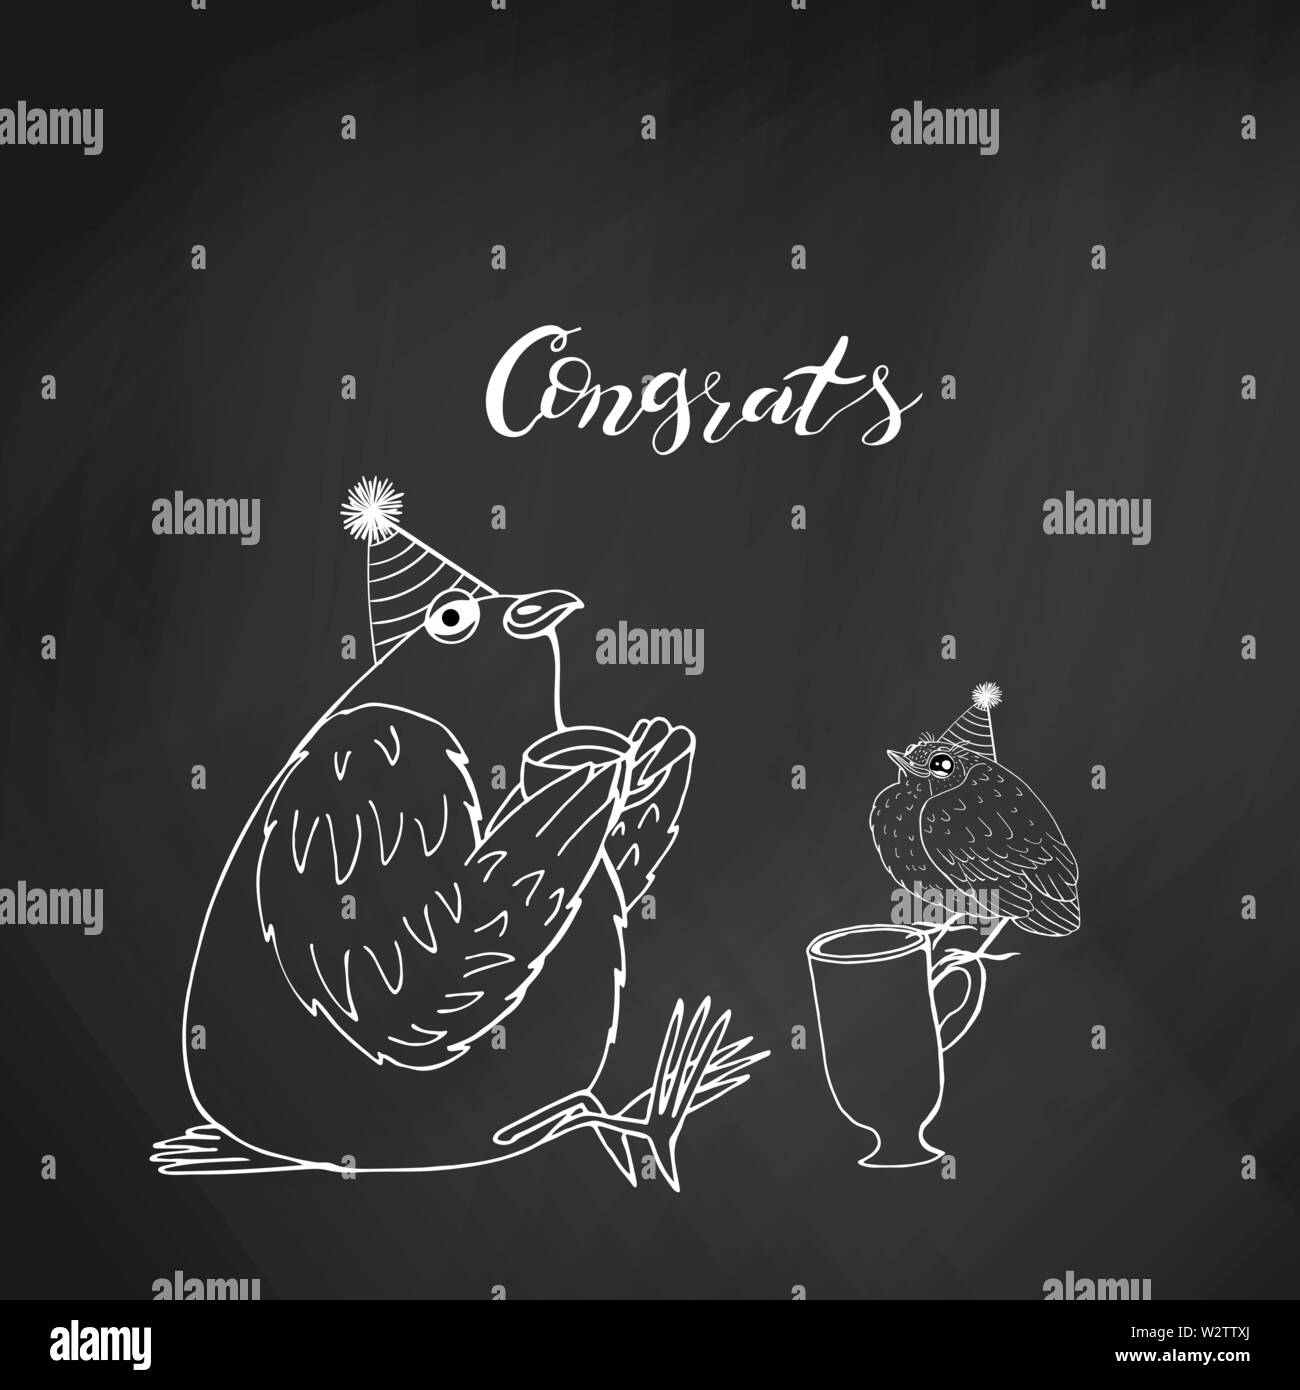 cute pigeon holding cup of tea and little bird sitting on a cup. hand lettering congrats. on chalkboard background. stock vector illustration. Stock Vector